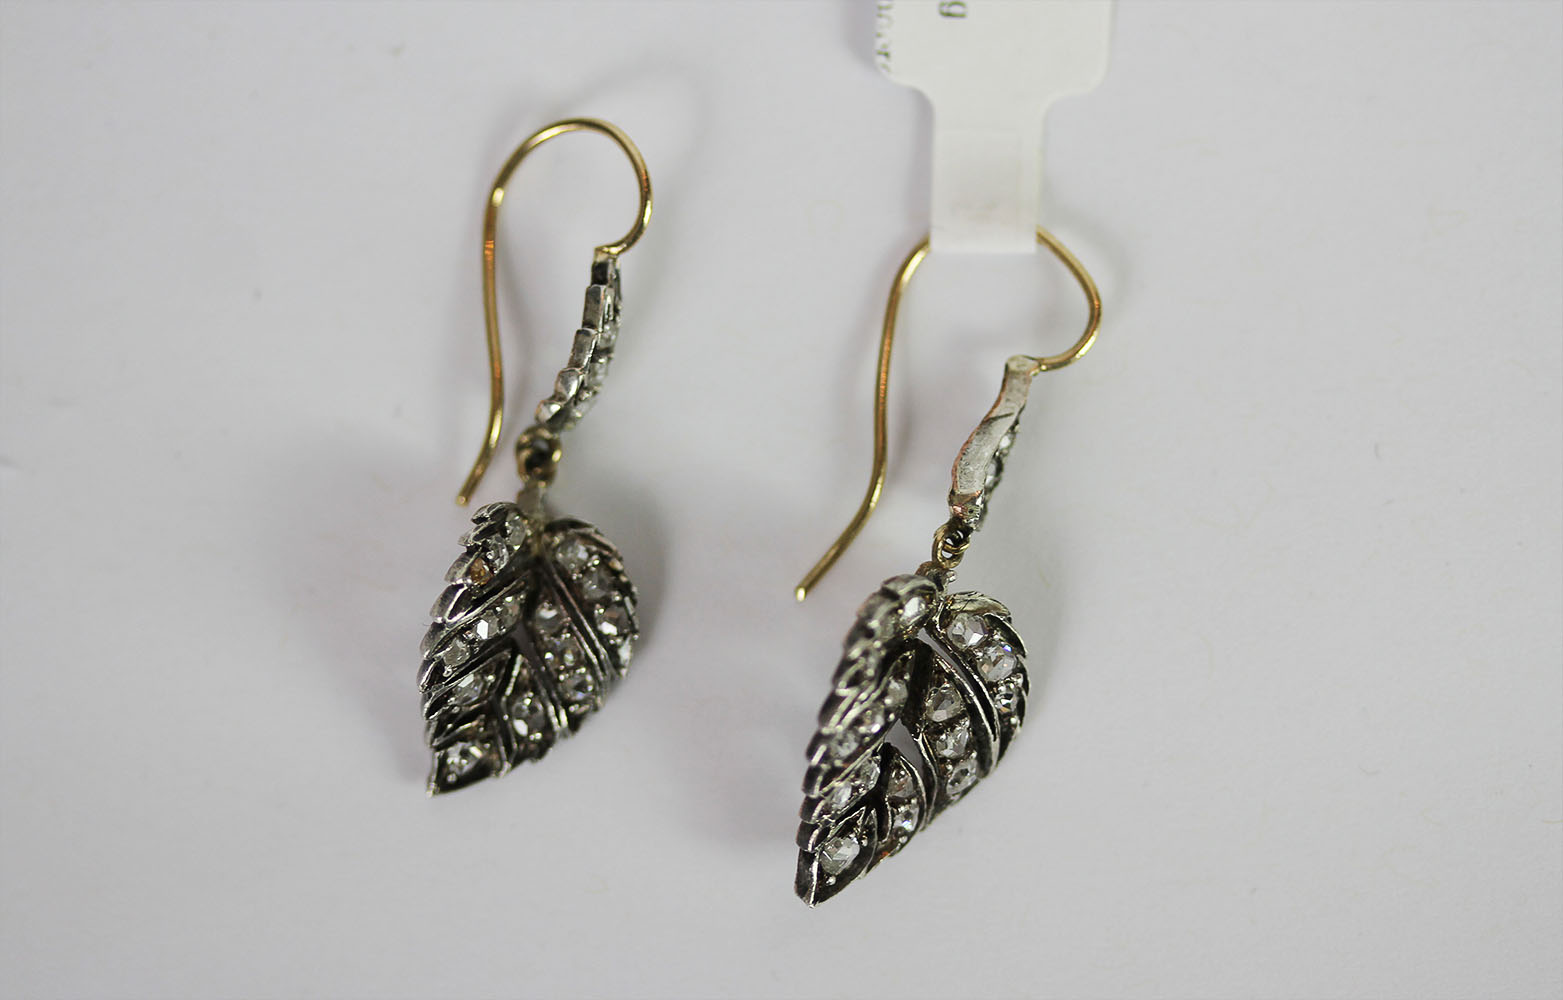 Victorian rose cut diamond leaf earrings, rose cut diamond leaves suspended from French wires,